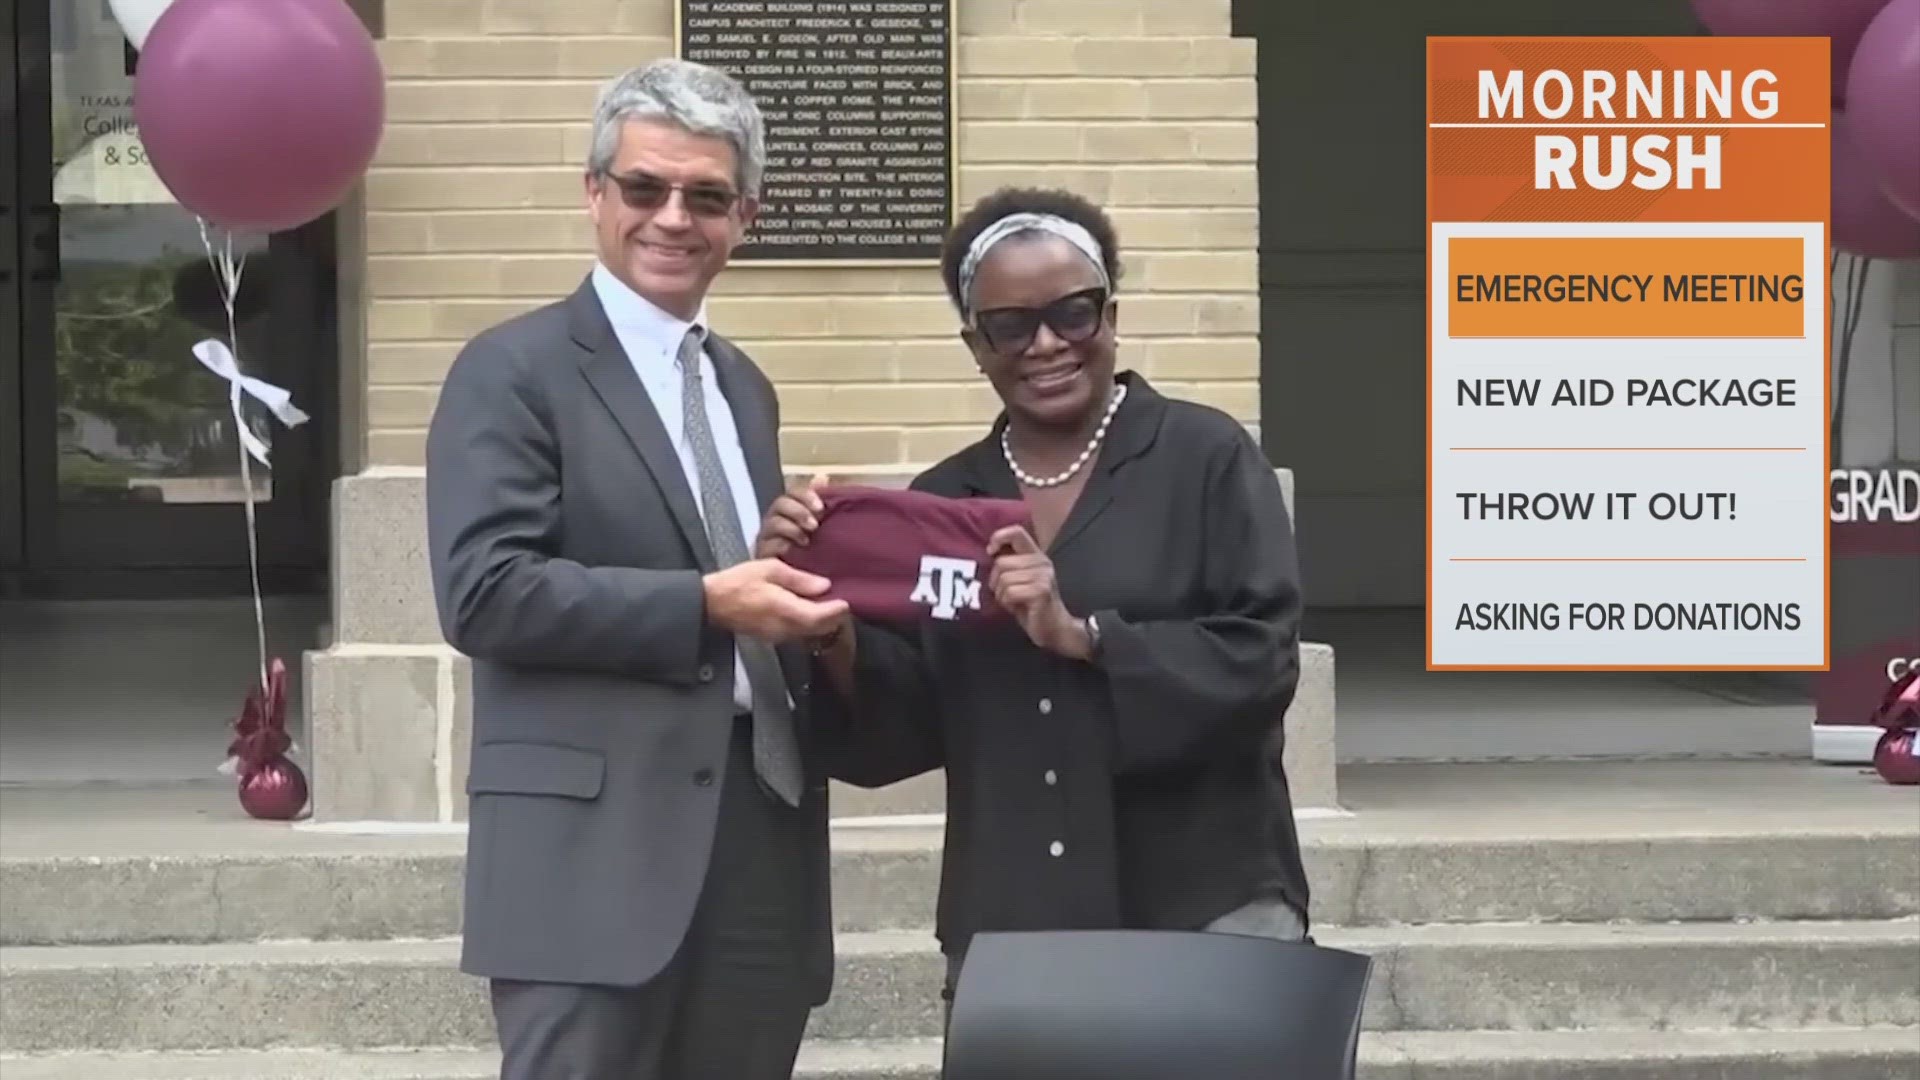 UT Prof. Kathleen McElroy's A&M dell was reduced after constituents in the A&M system expressed concern of her experience at The NYT and her race & diversity work.